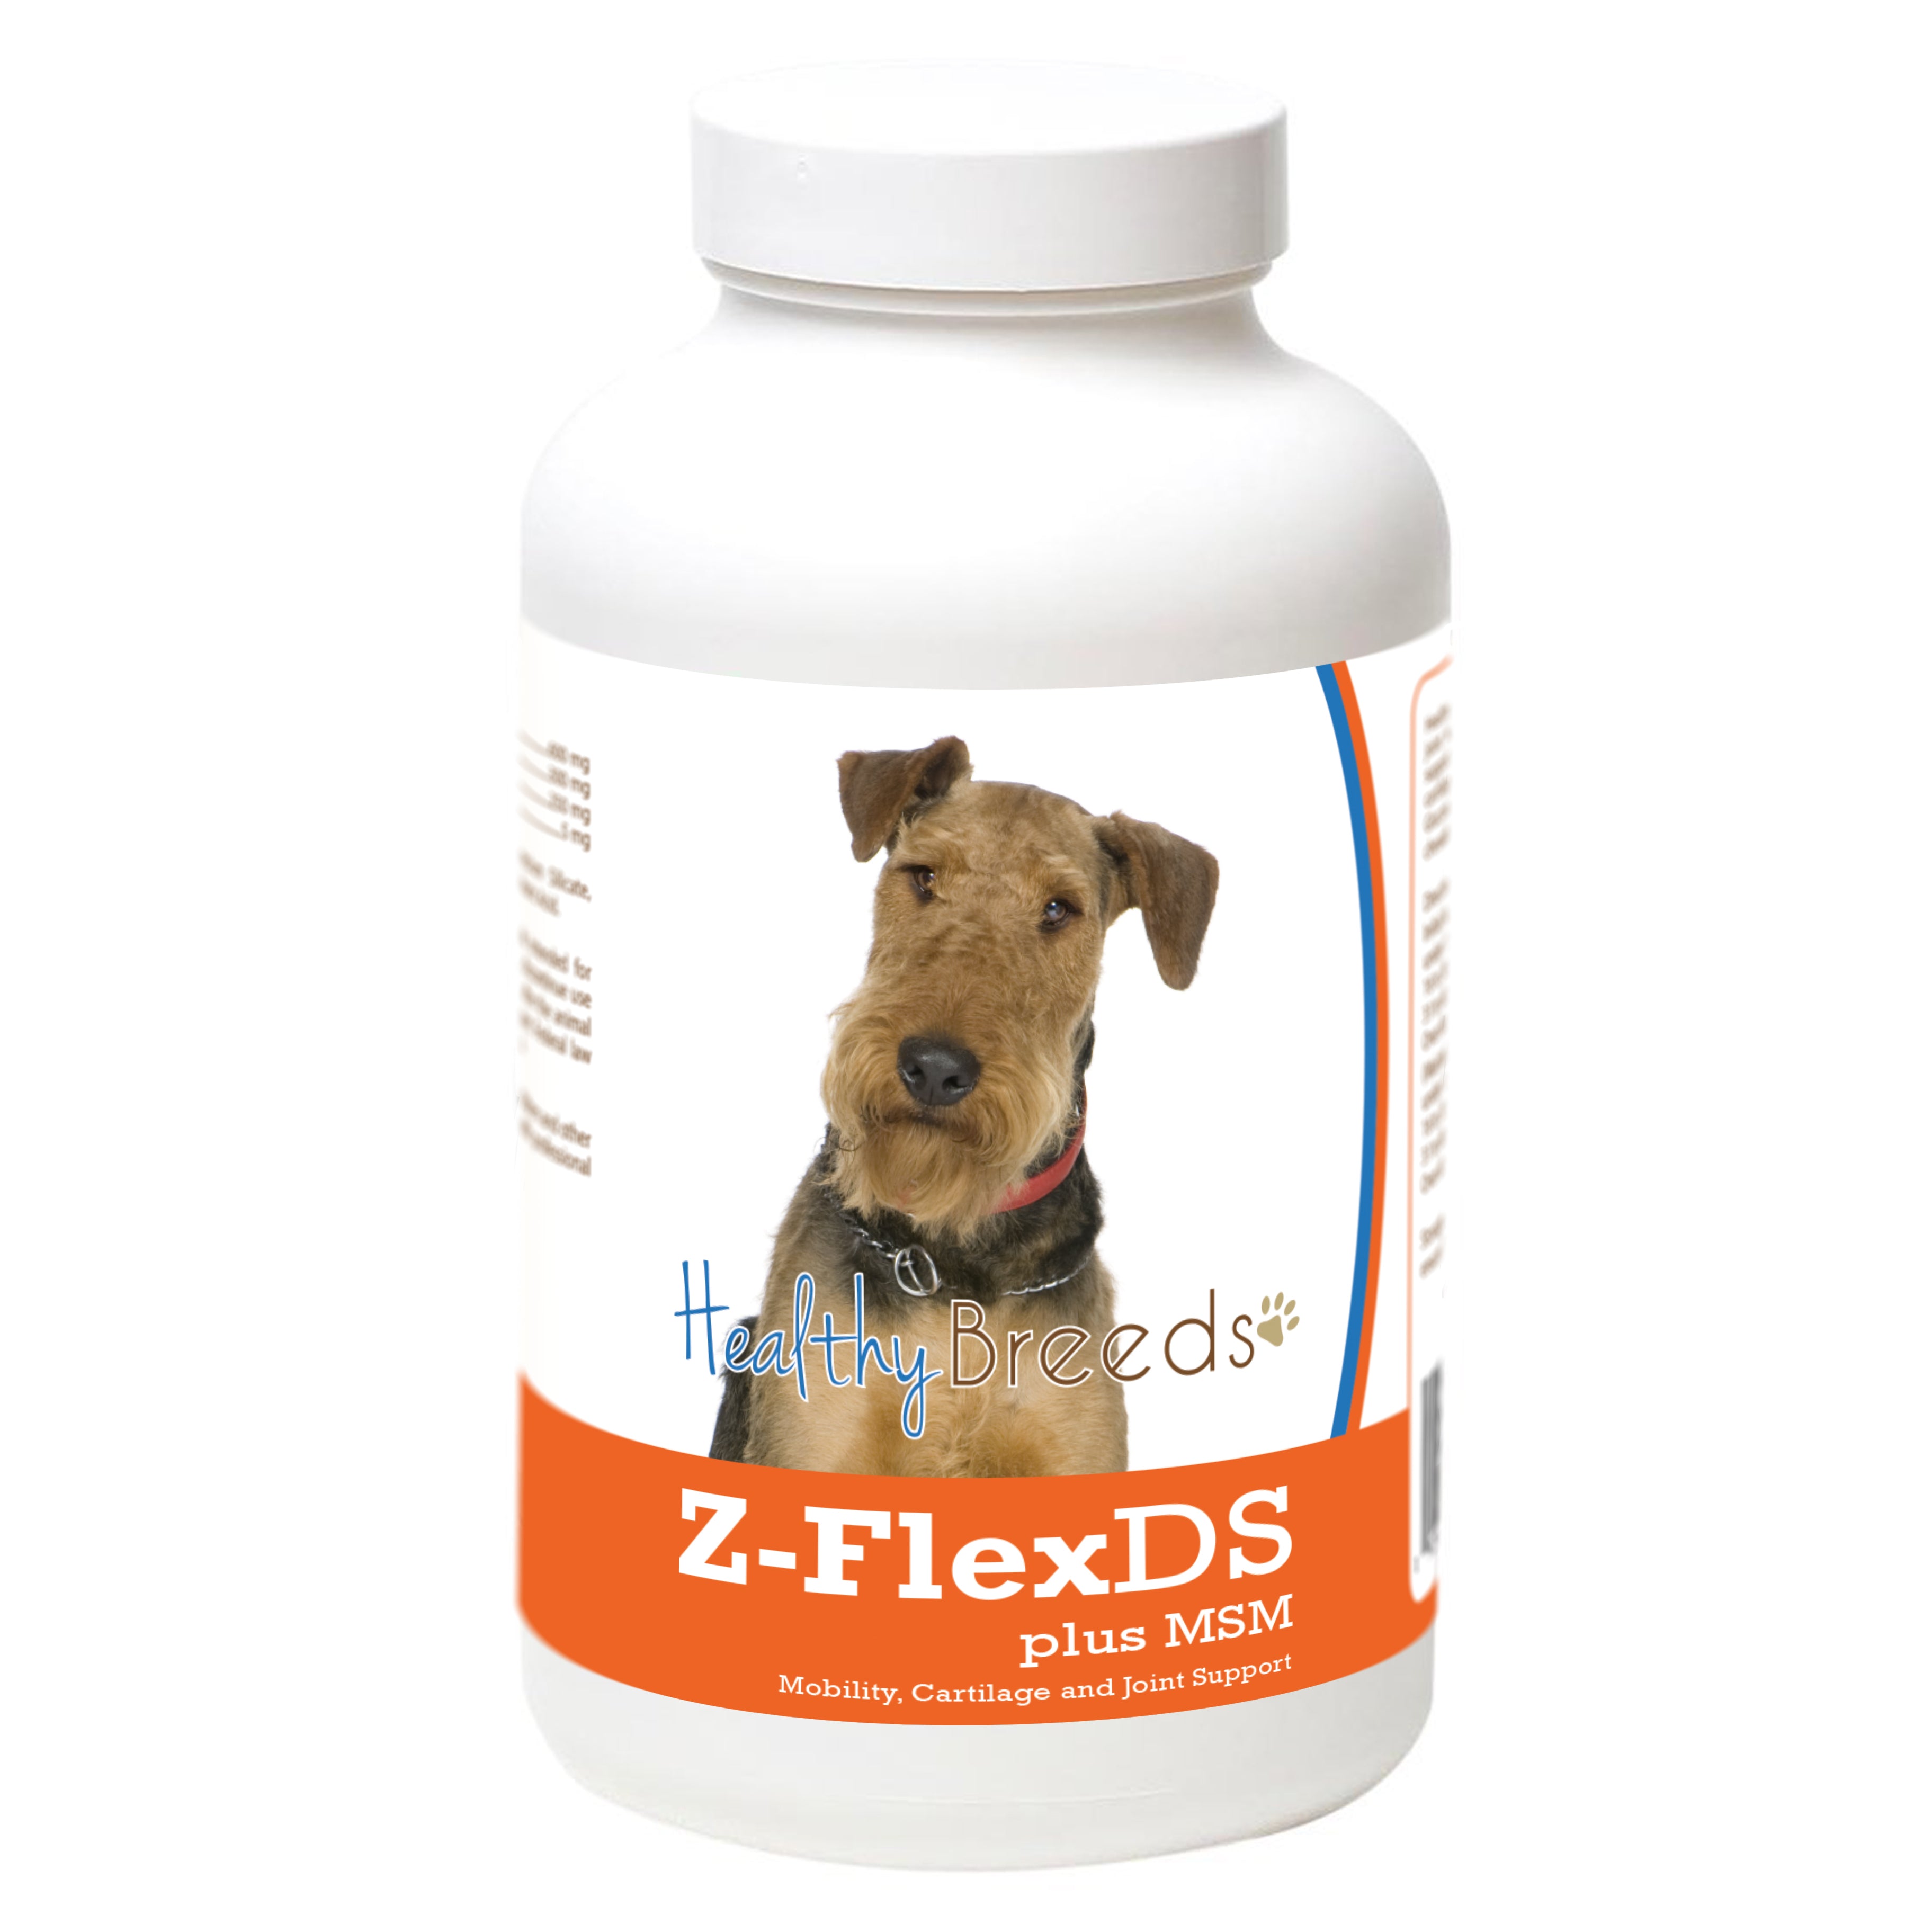 Airedale Terrier Z-FlexDS plus MSM Chewable Tablets 60 Count